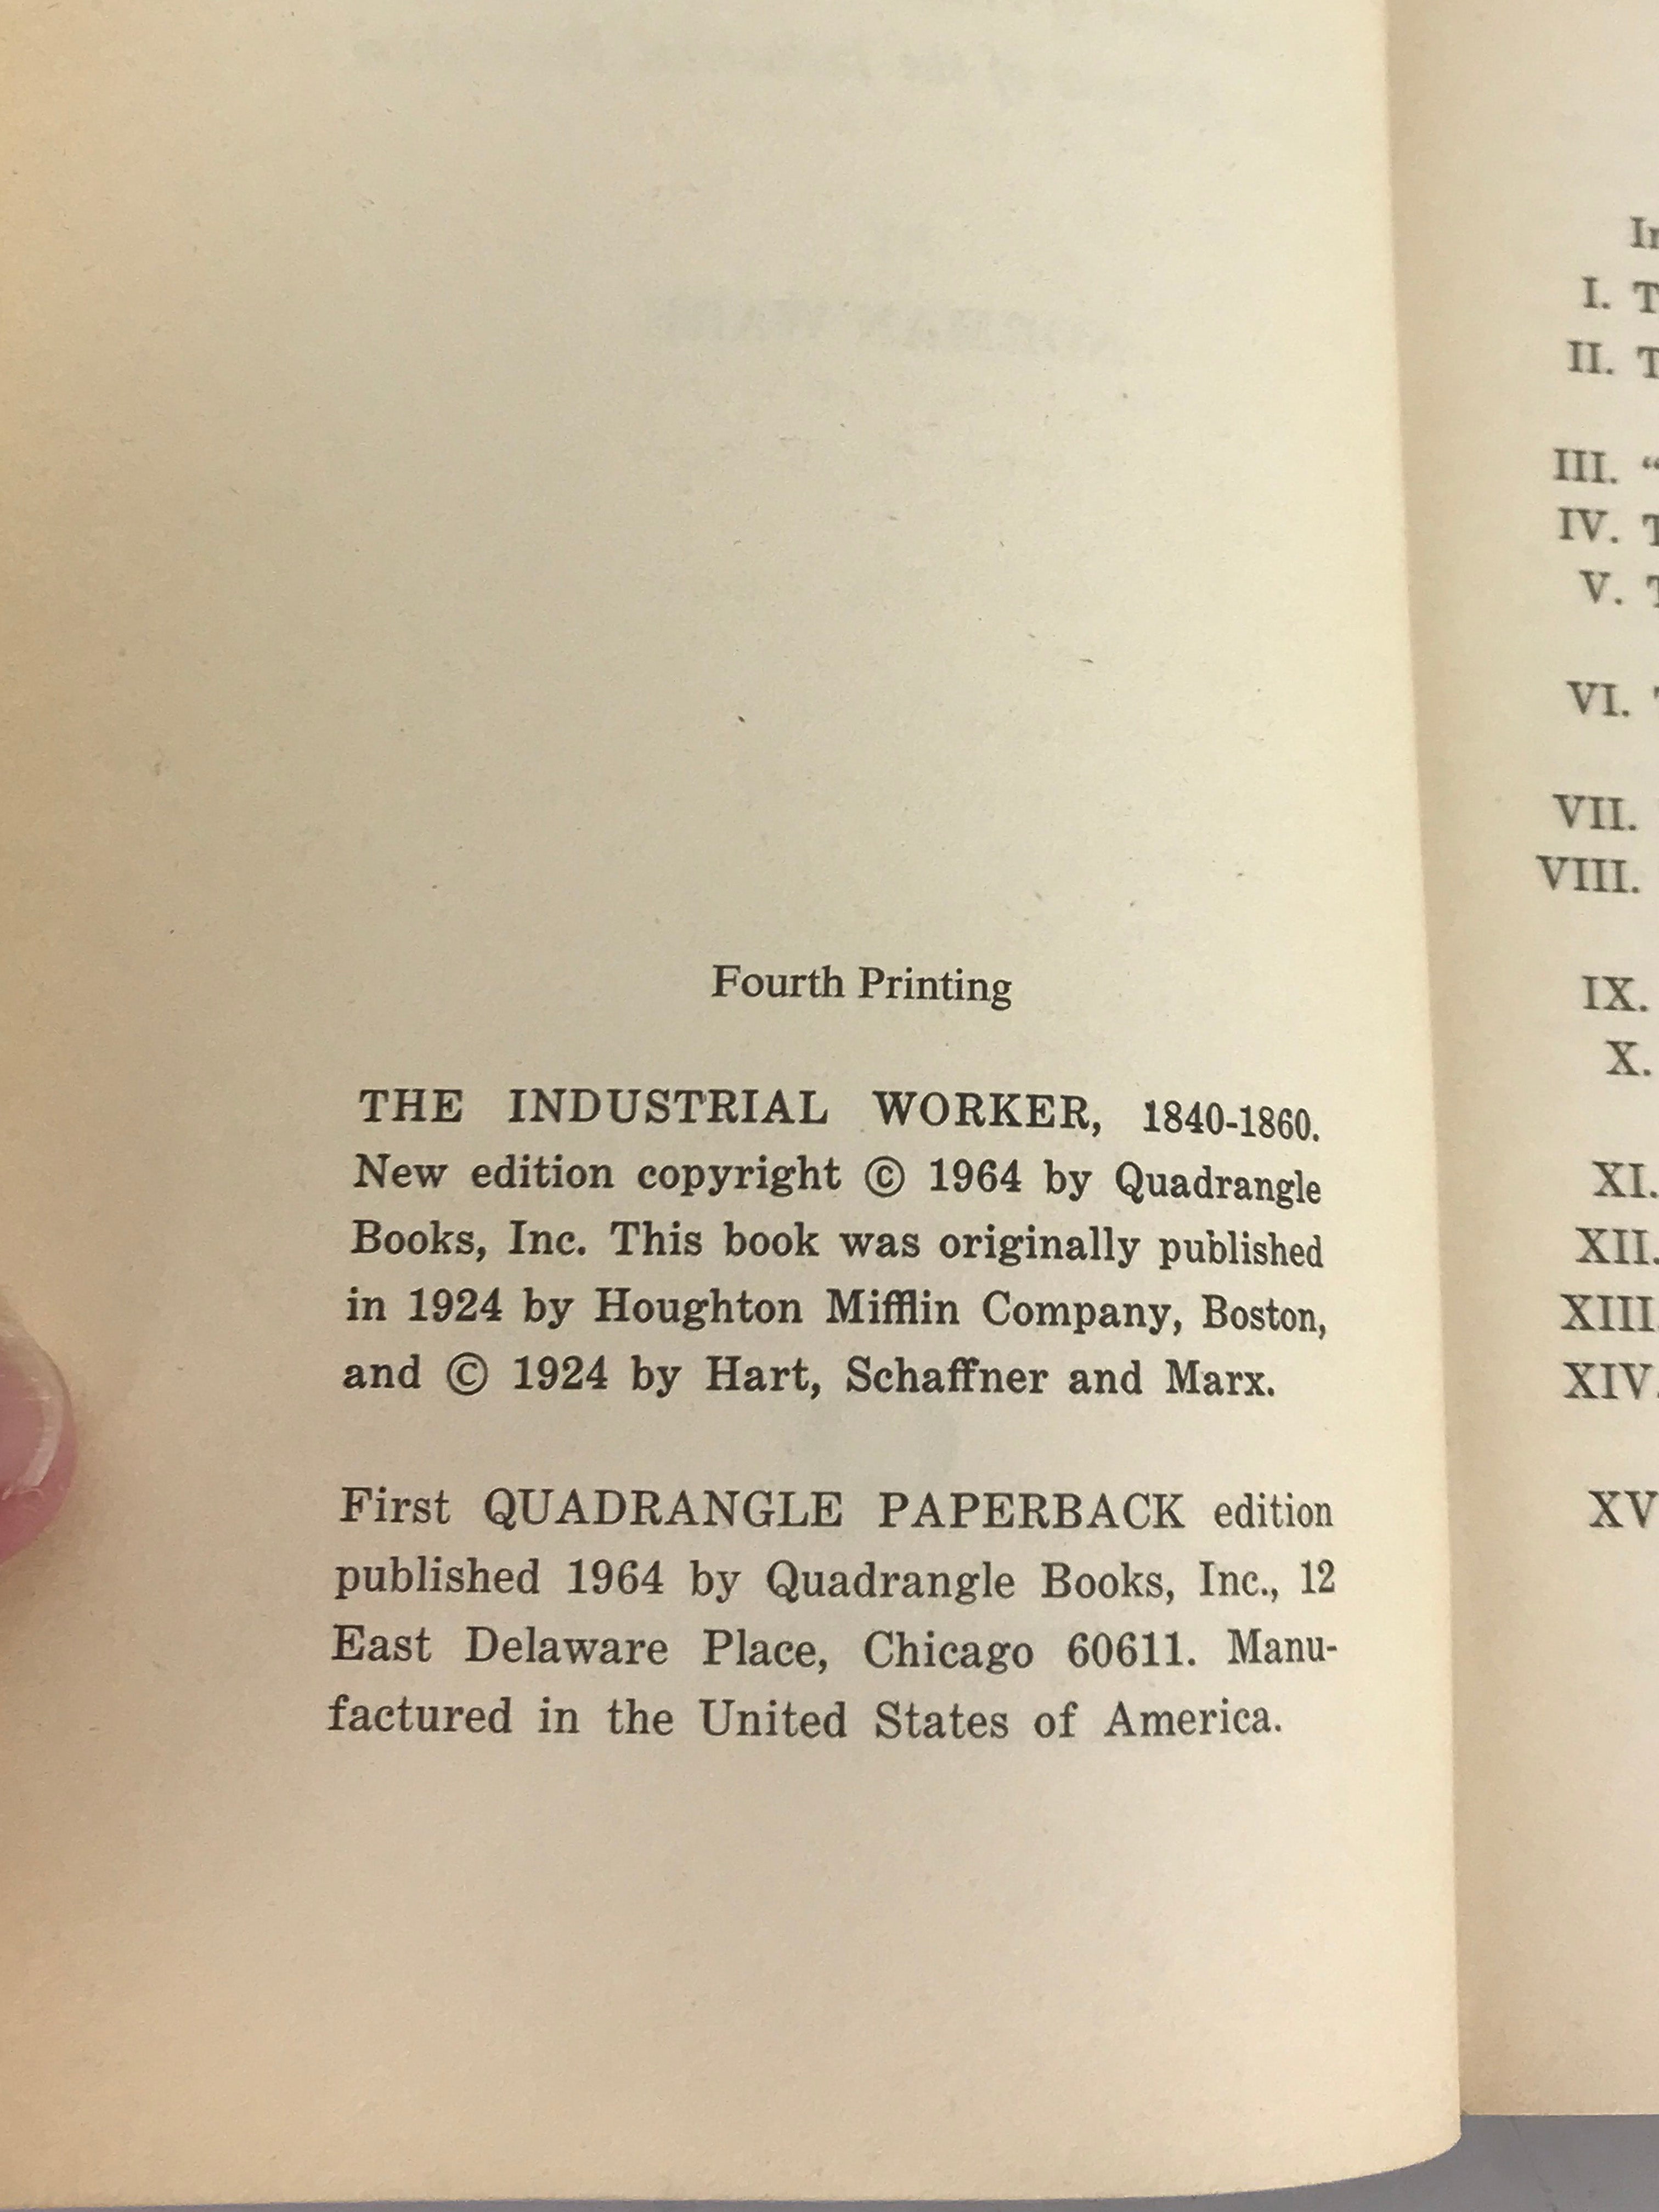 Lot of 3 Industrial Society and the Worker Books 1962-1964 HC DJ SC